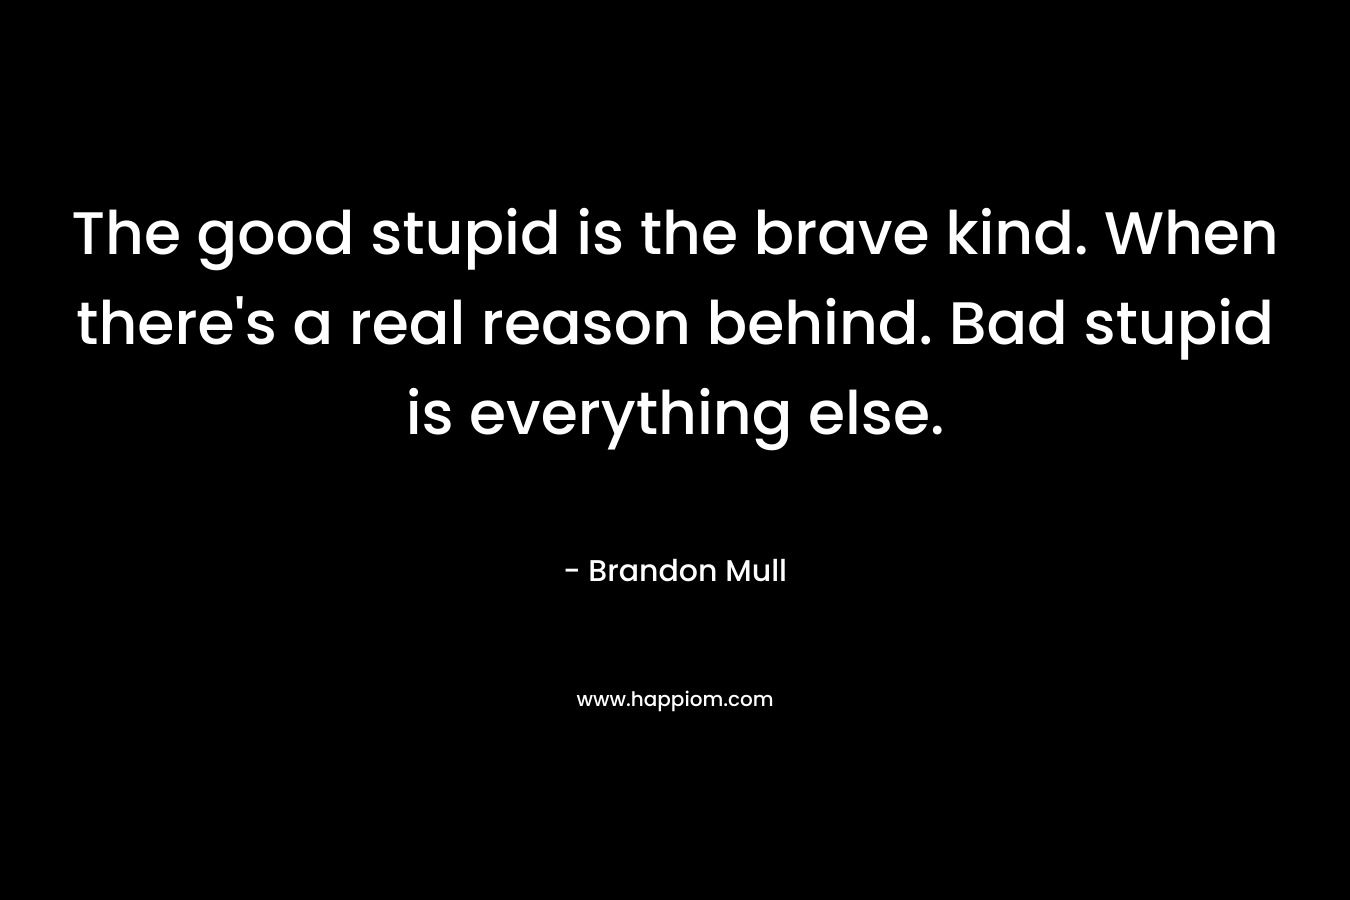 The good stupid is the brave kind. When there's a real reason behind. Bad stupid is everything else.